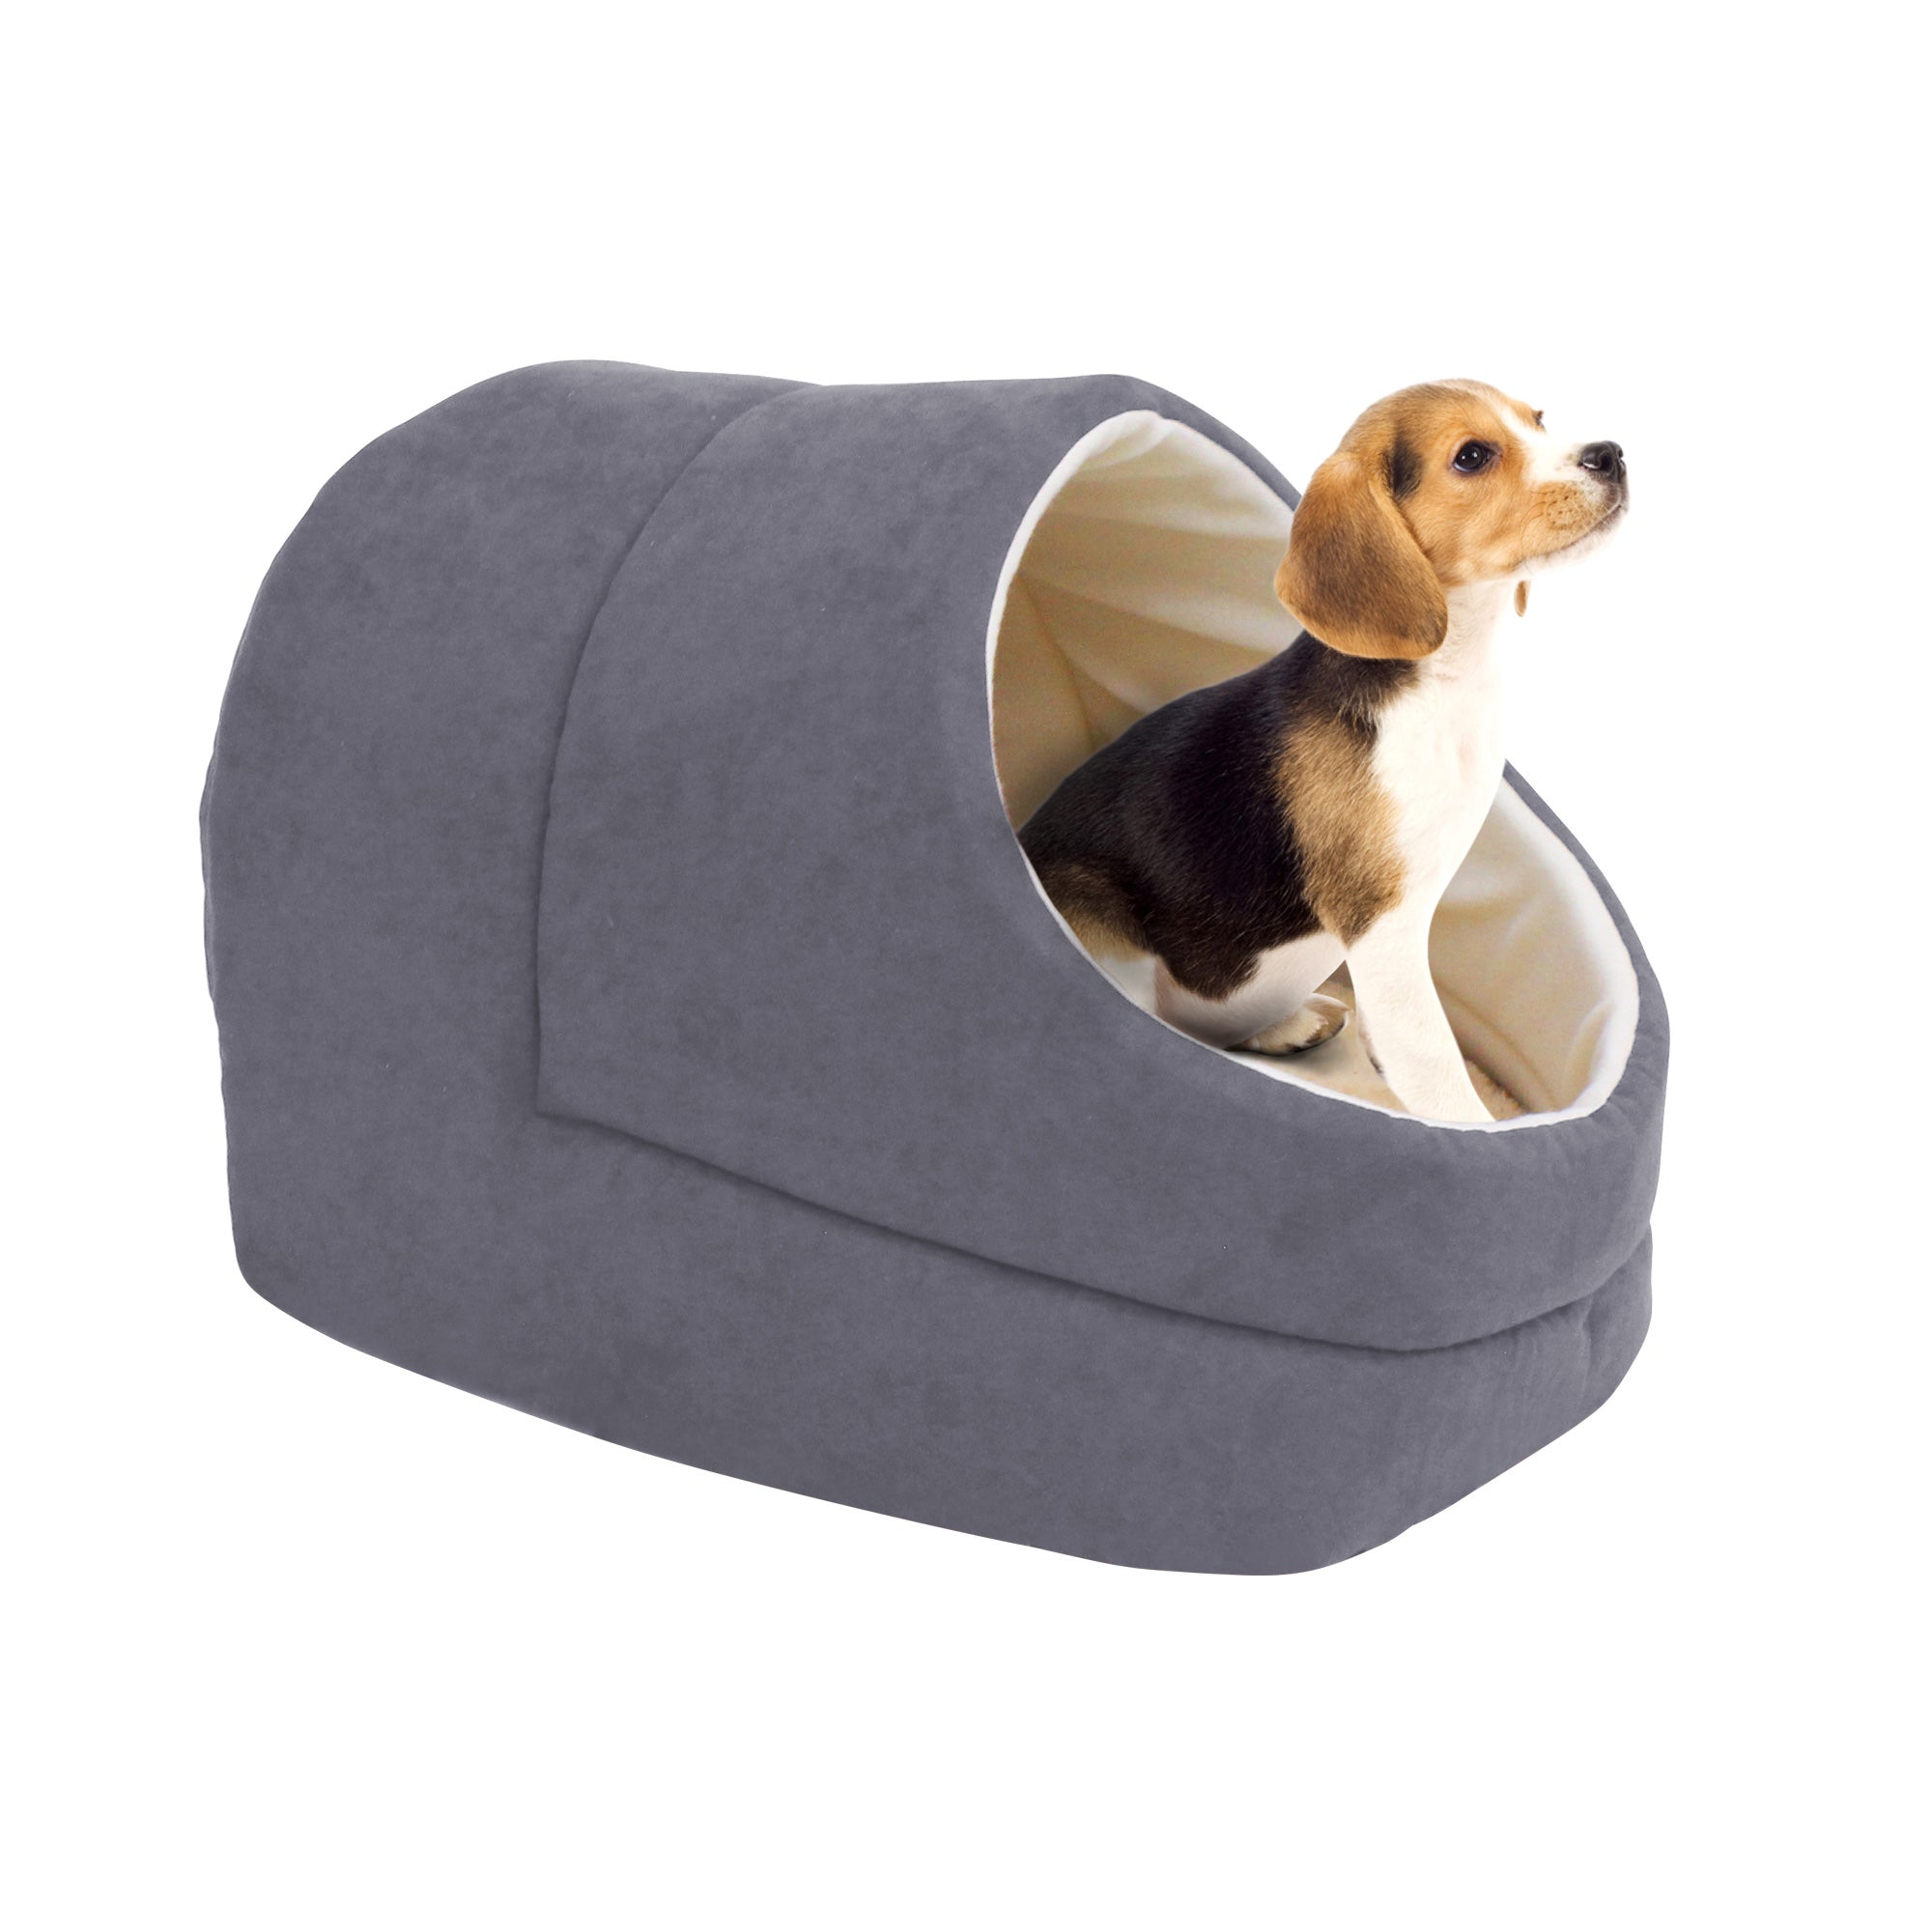 GOOPAWS Cave Covered for Cat Small Dog Warming Burrow Cat Bed, Gray